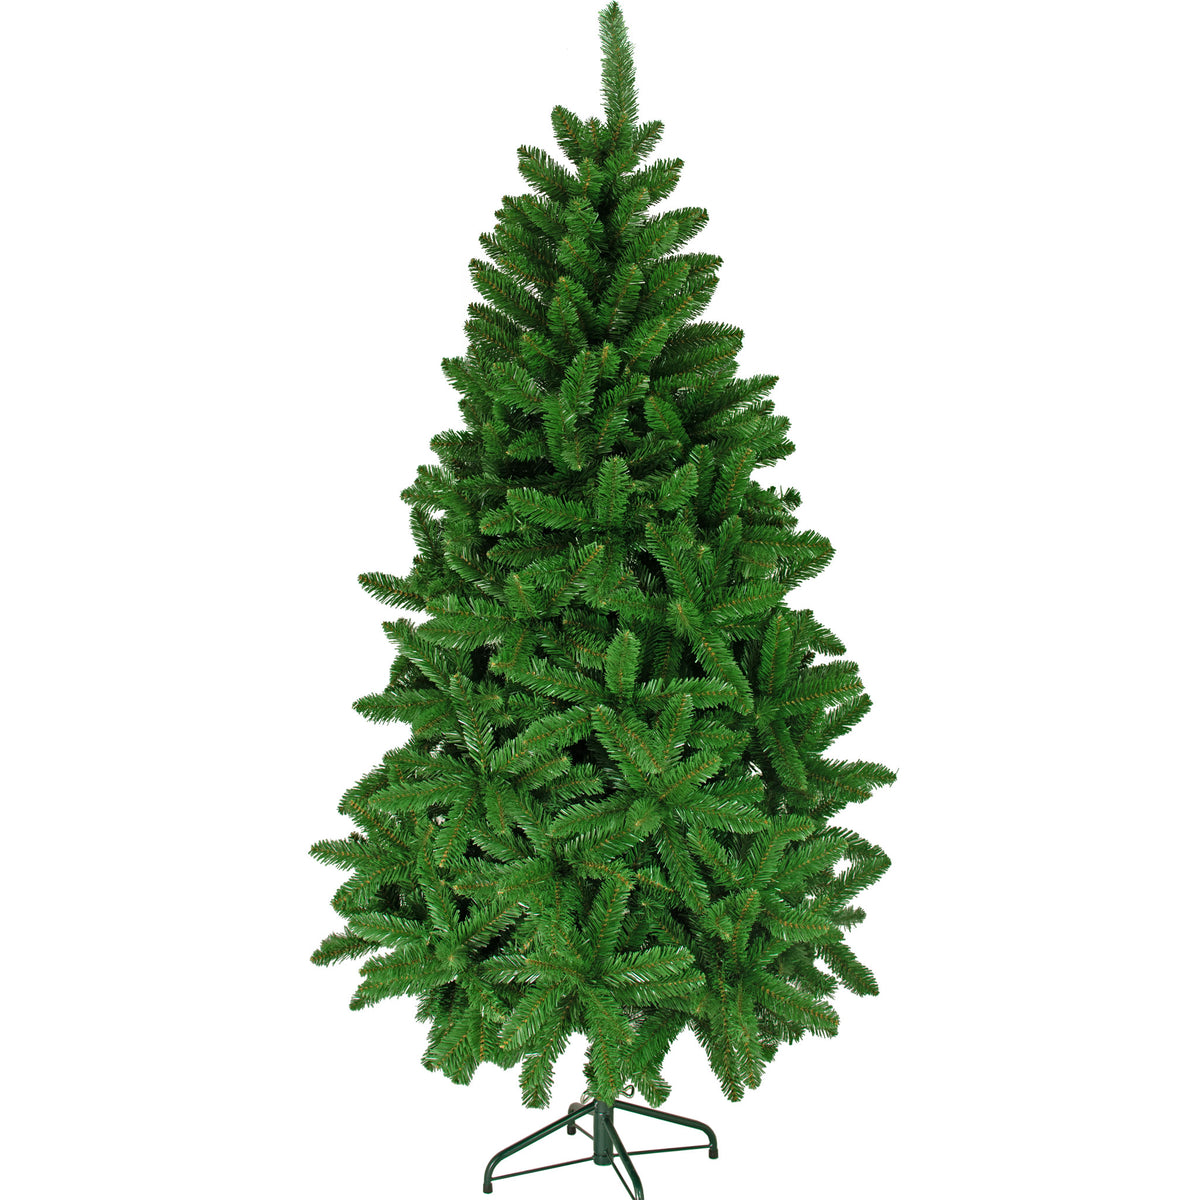 Introducing the 6FT Tall Virginia Pine Tree from our Luxe Christmas Collection!